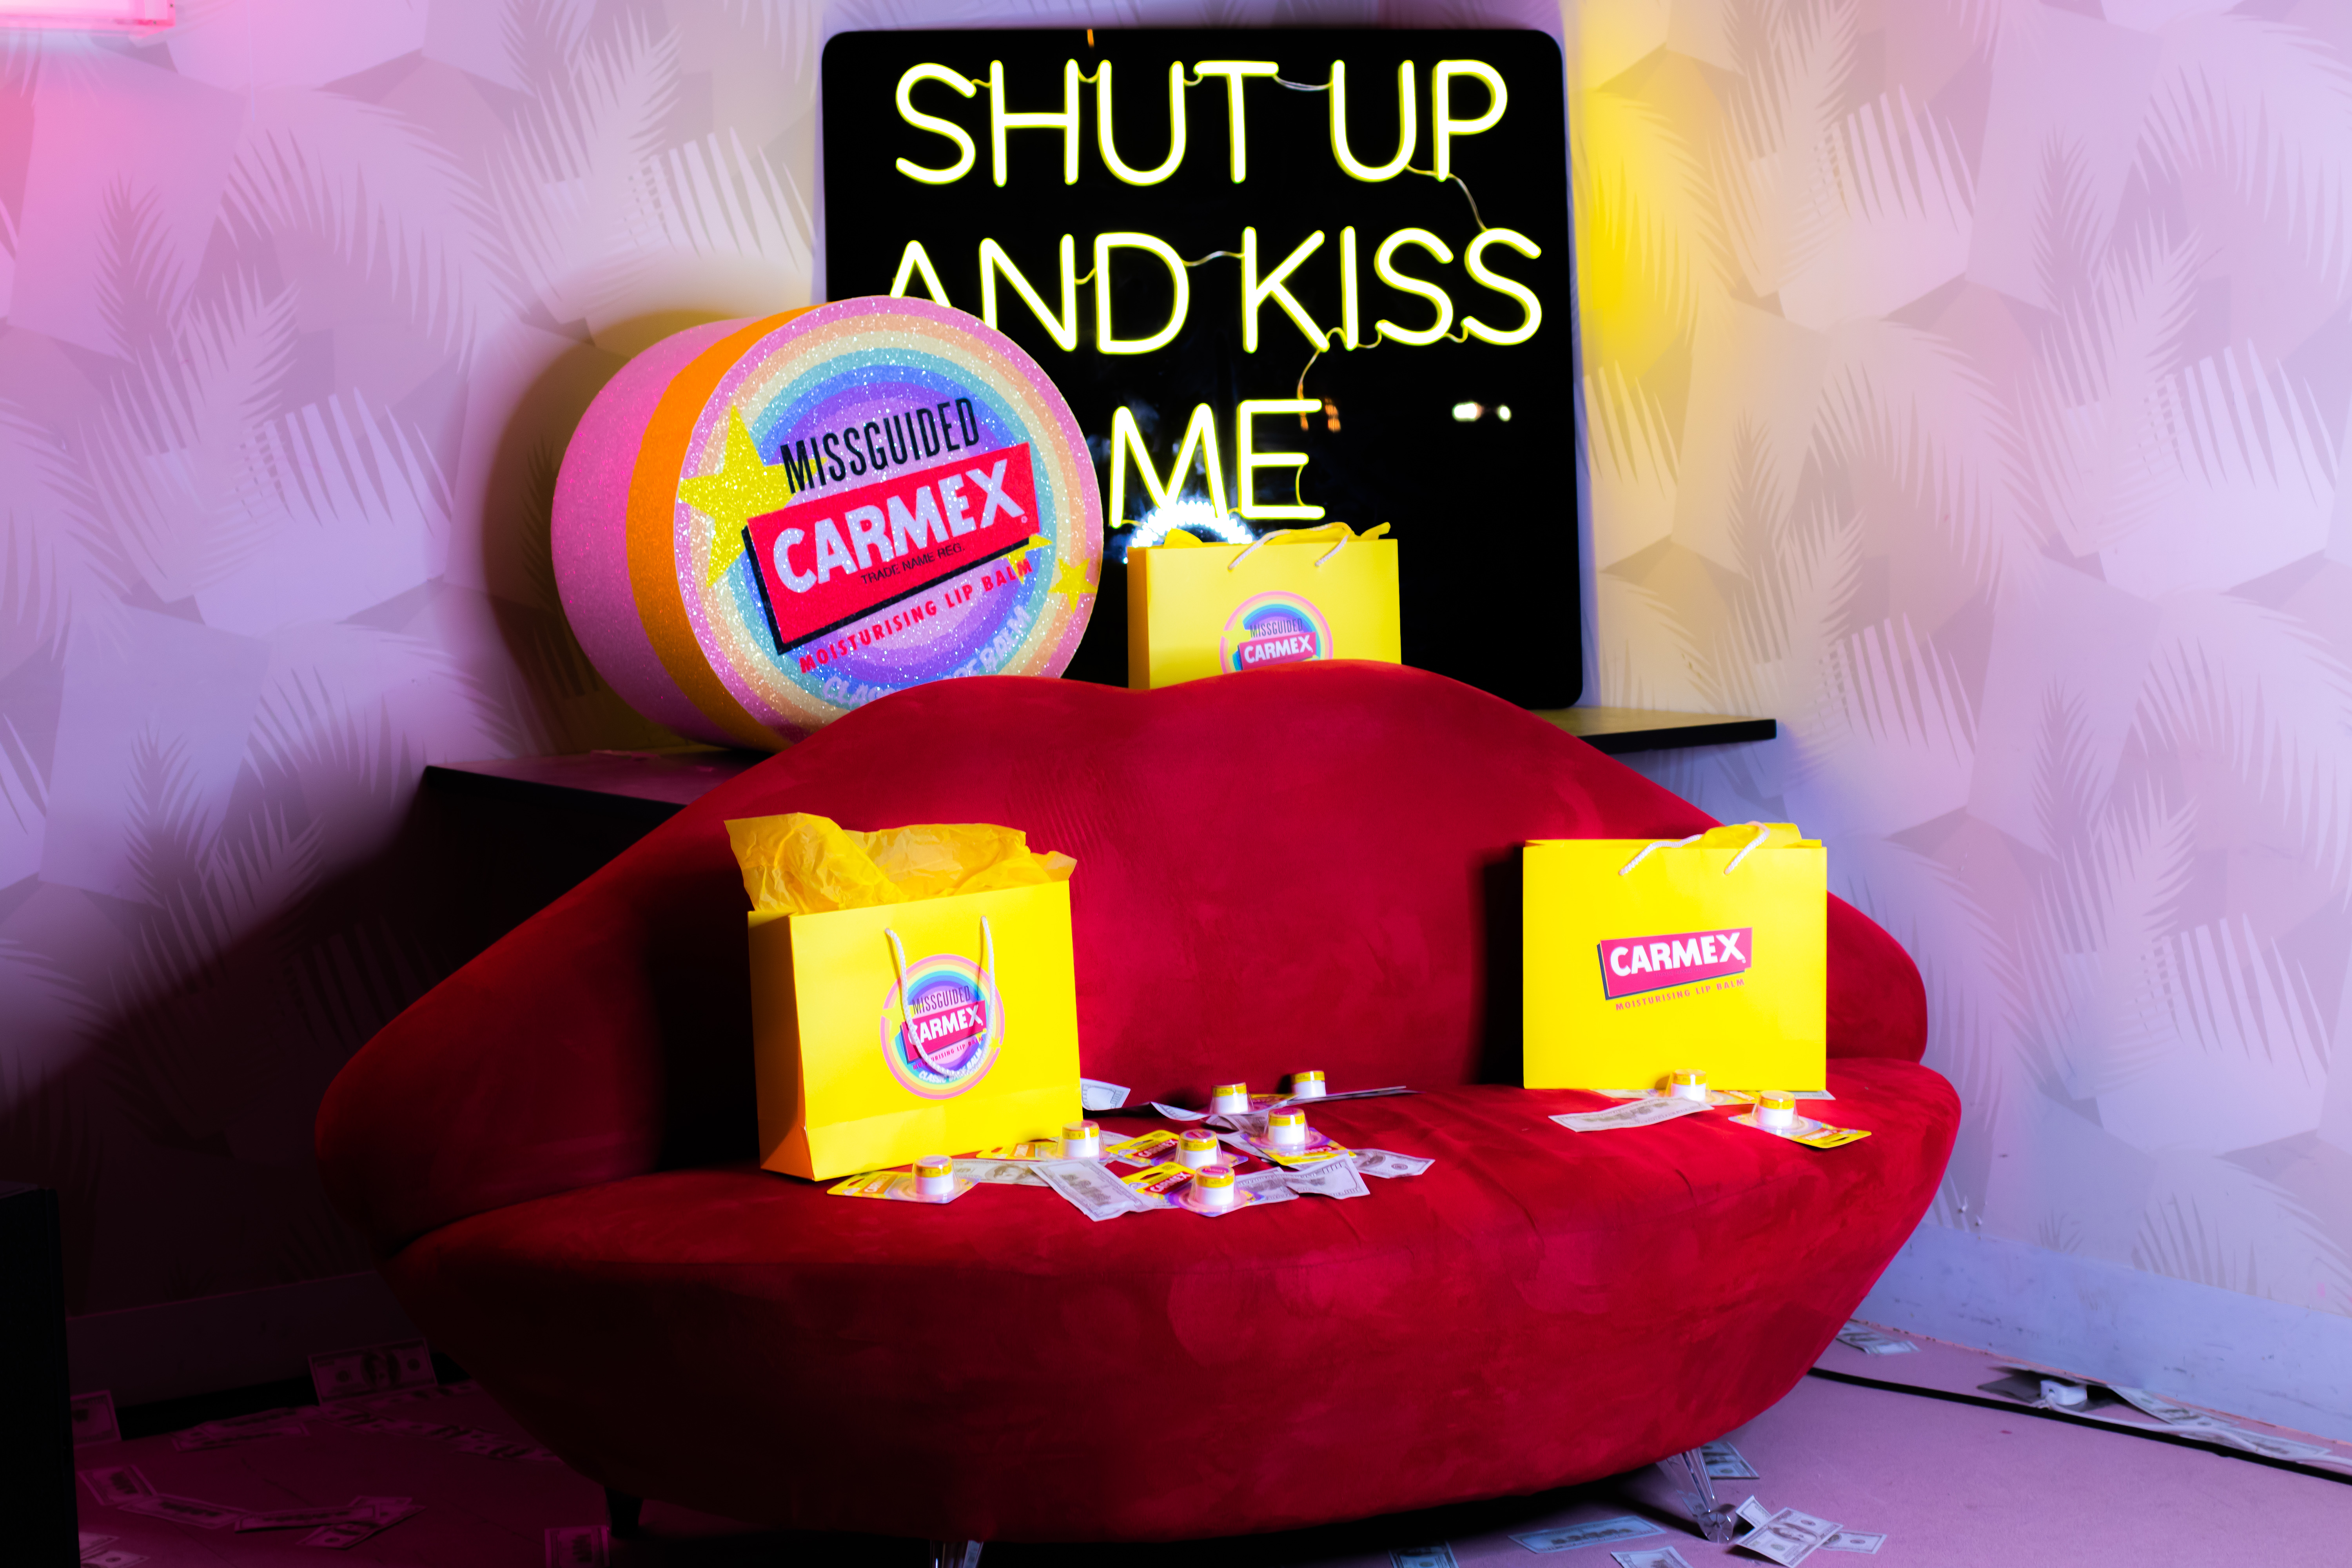 Carmex X Missguided: Keeping your lips nourished and wardrobe trendy